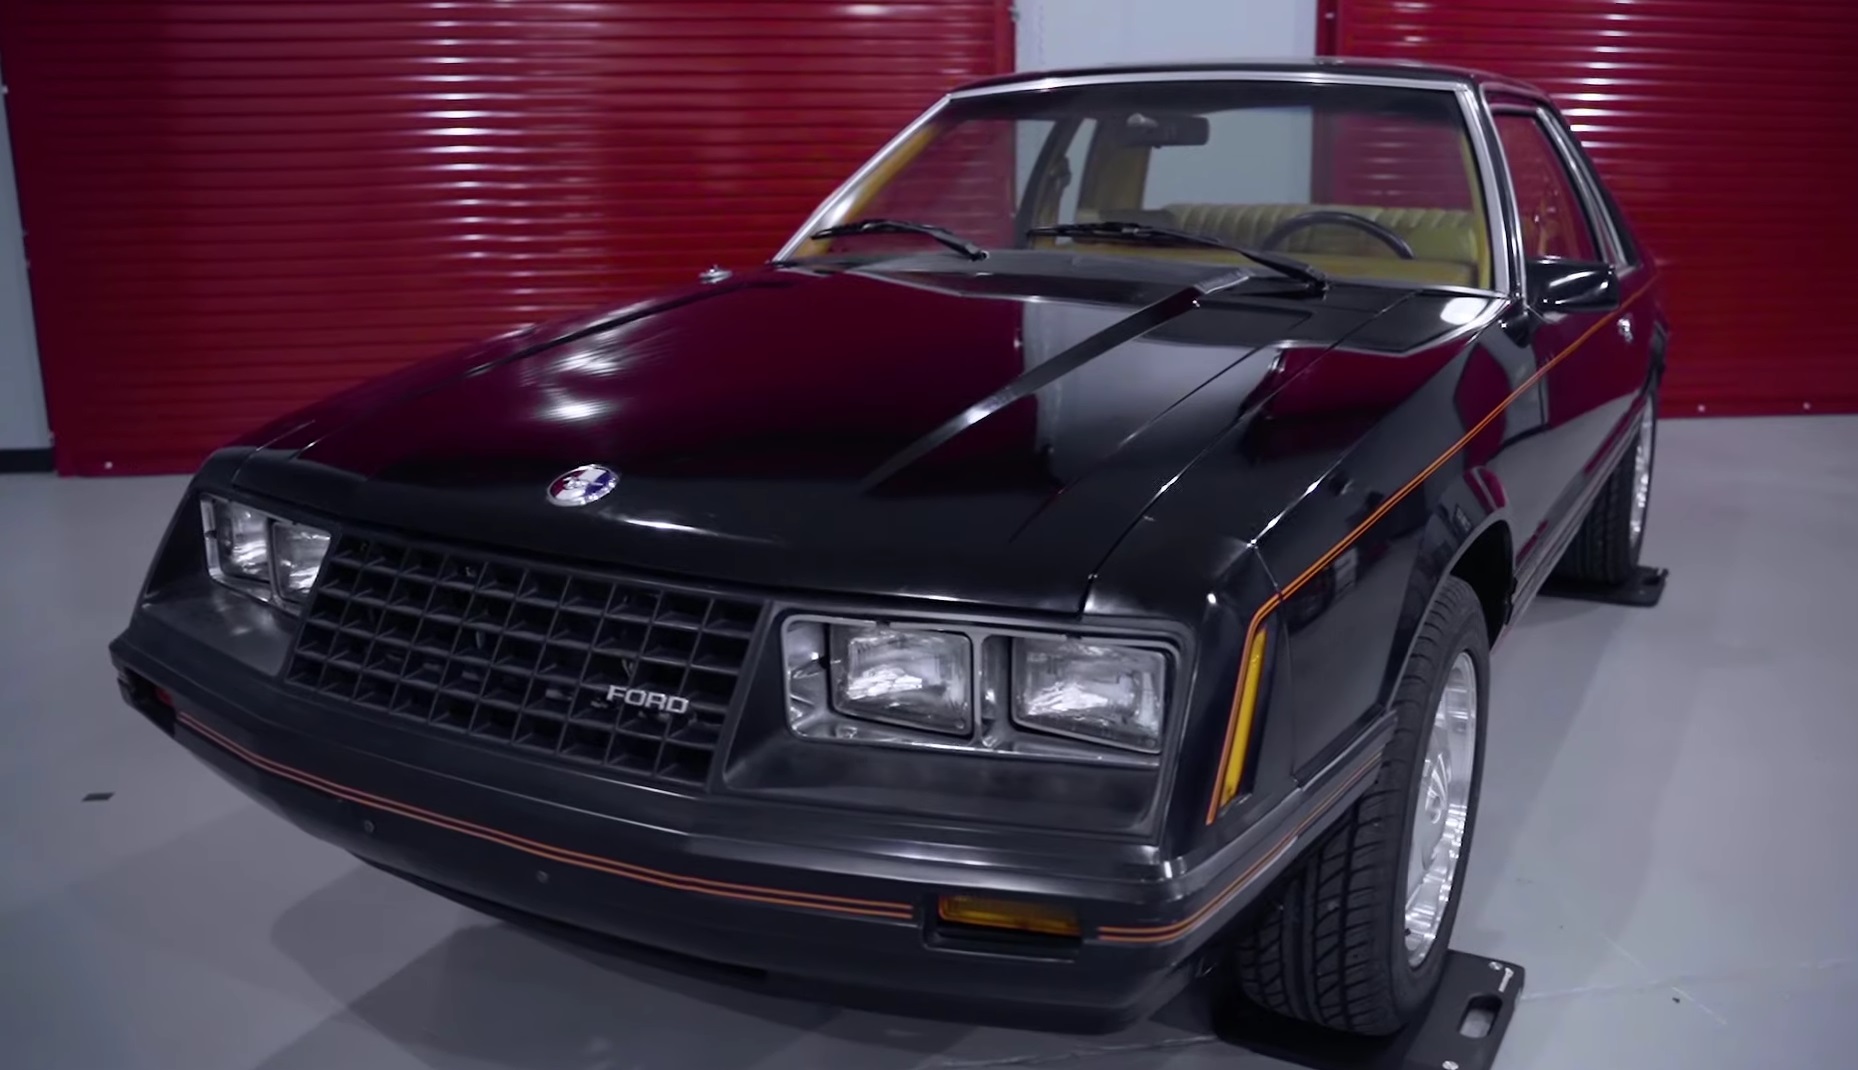 Video: How Much Does The 1979 Ford Mustang Ghia Weigh?